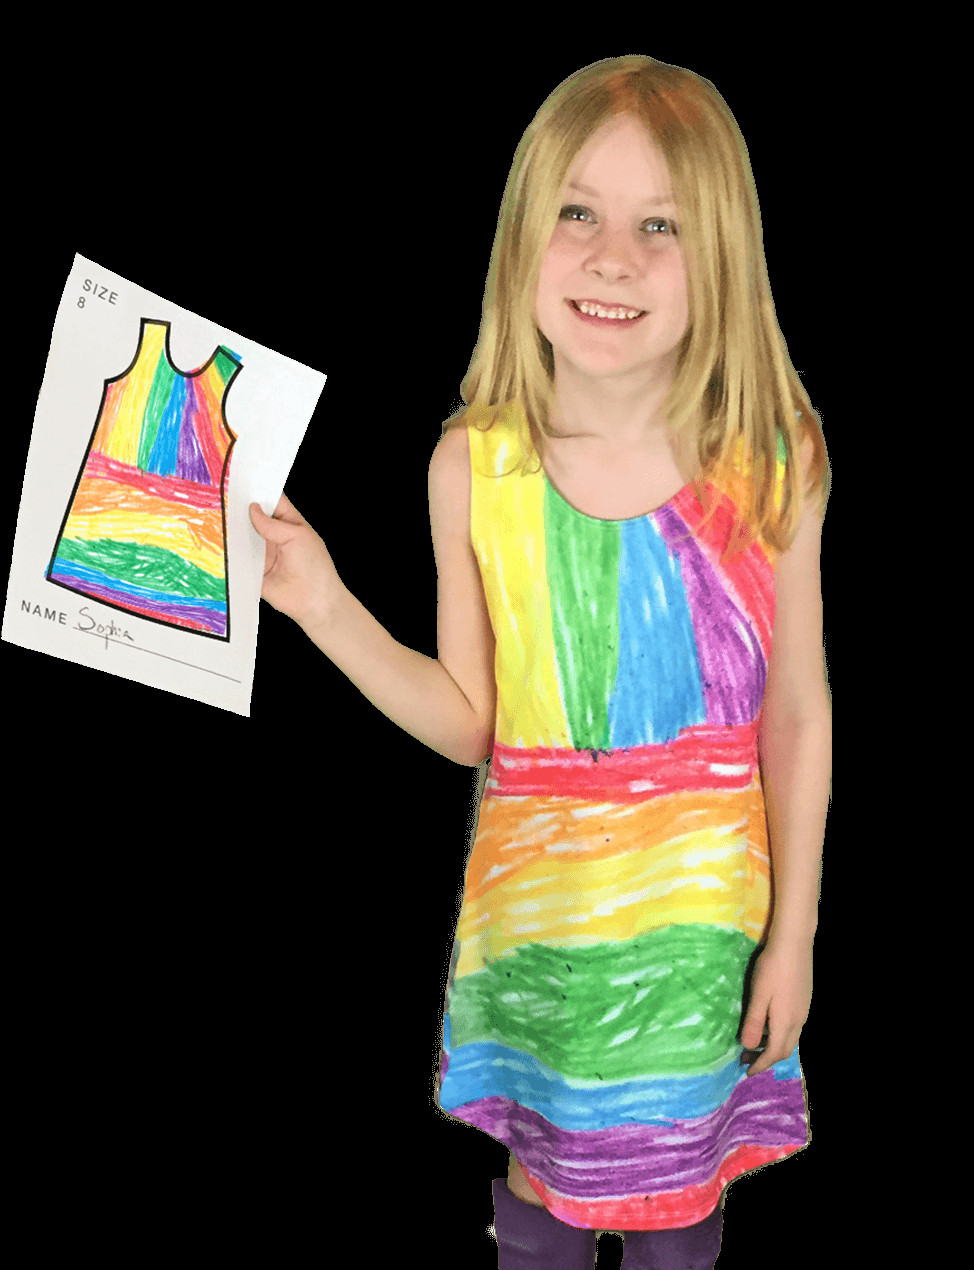 Fashion Design For Children
 This pany Lets Kids Design Their Own Clothes And The